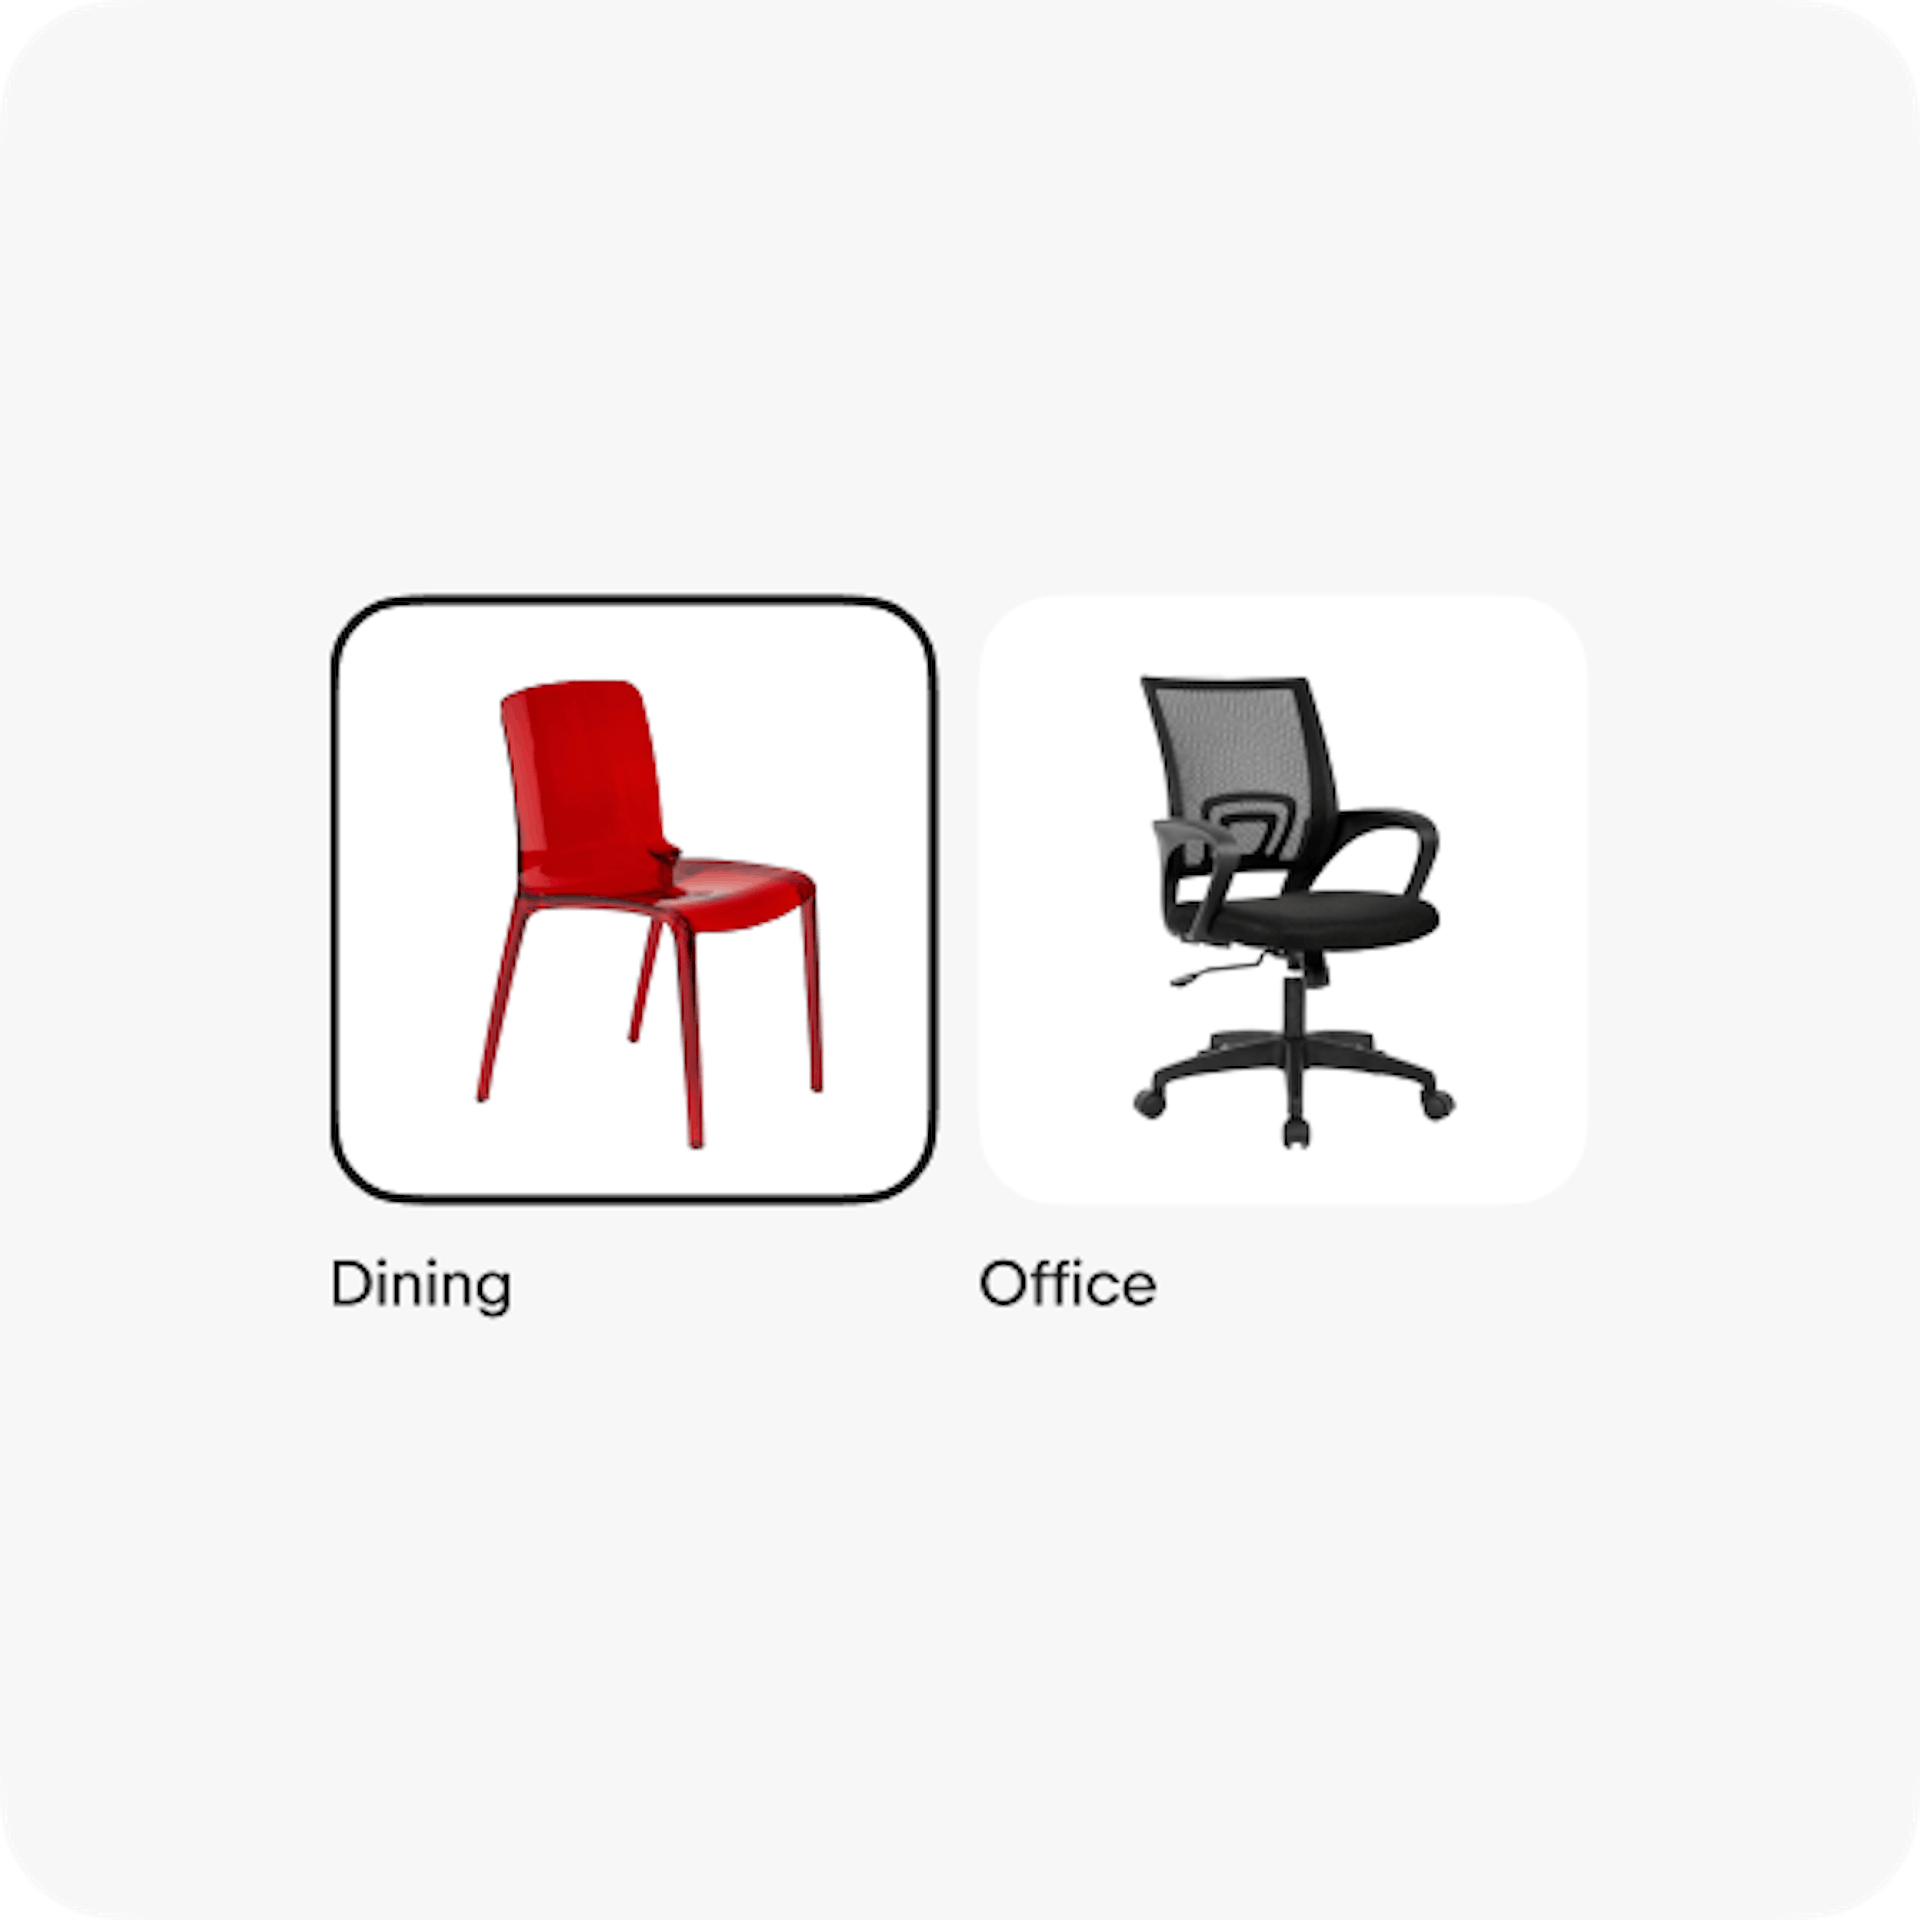 Three toggle buttons in a horizontal line and each has a different image of a chair style. The first says “Dining” and is in a selected state with a 2px black border around the image. The other two chair images have white background and no border. The second style “Office” and the third is “Dining”. All images have 16px corner radius.